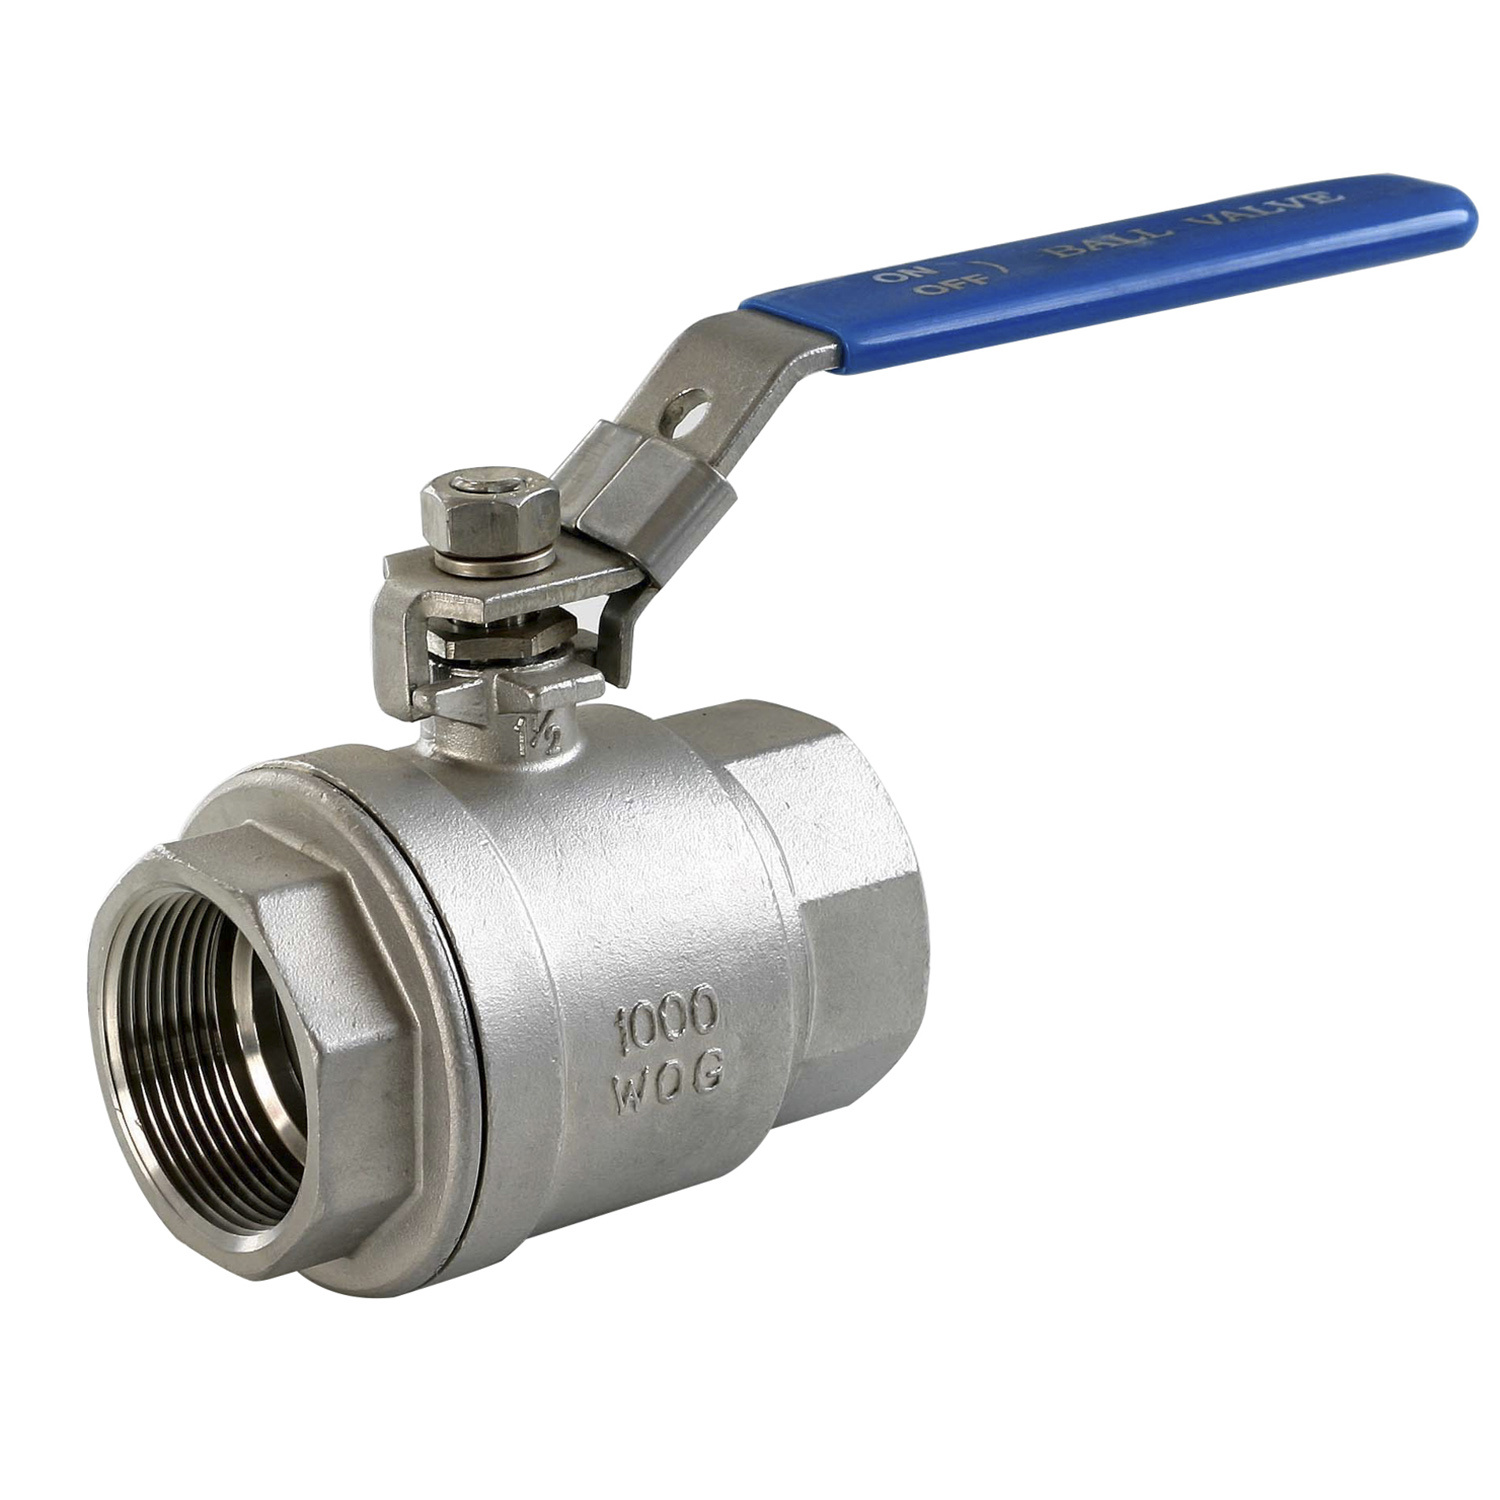 Stainless Steel 2PC Ball Valve with Pn16 Flange End